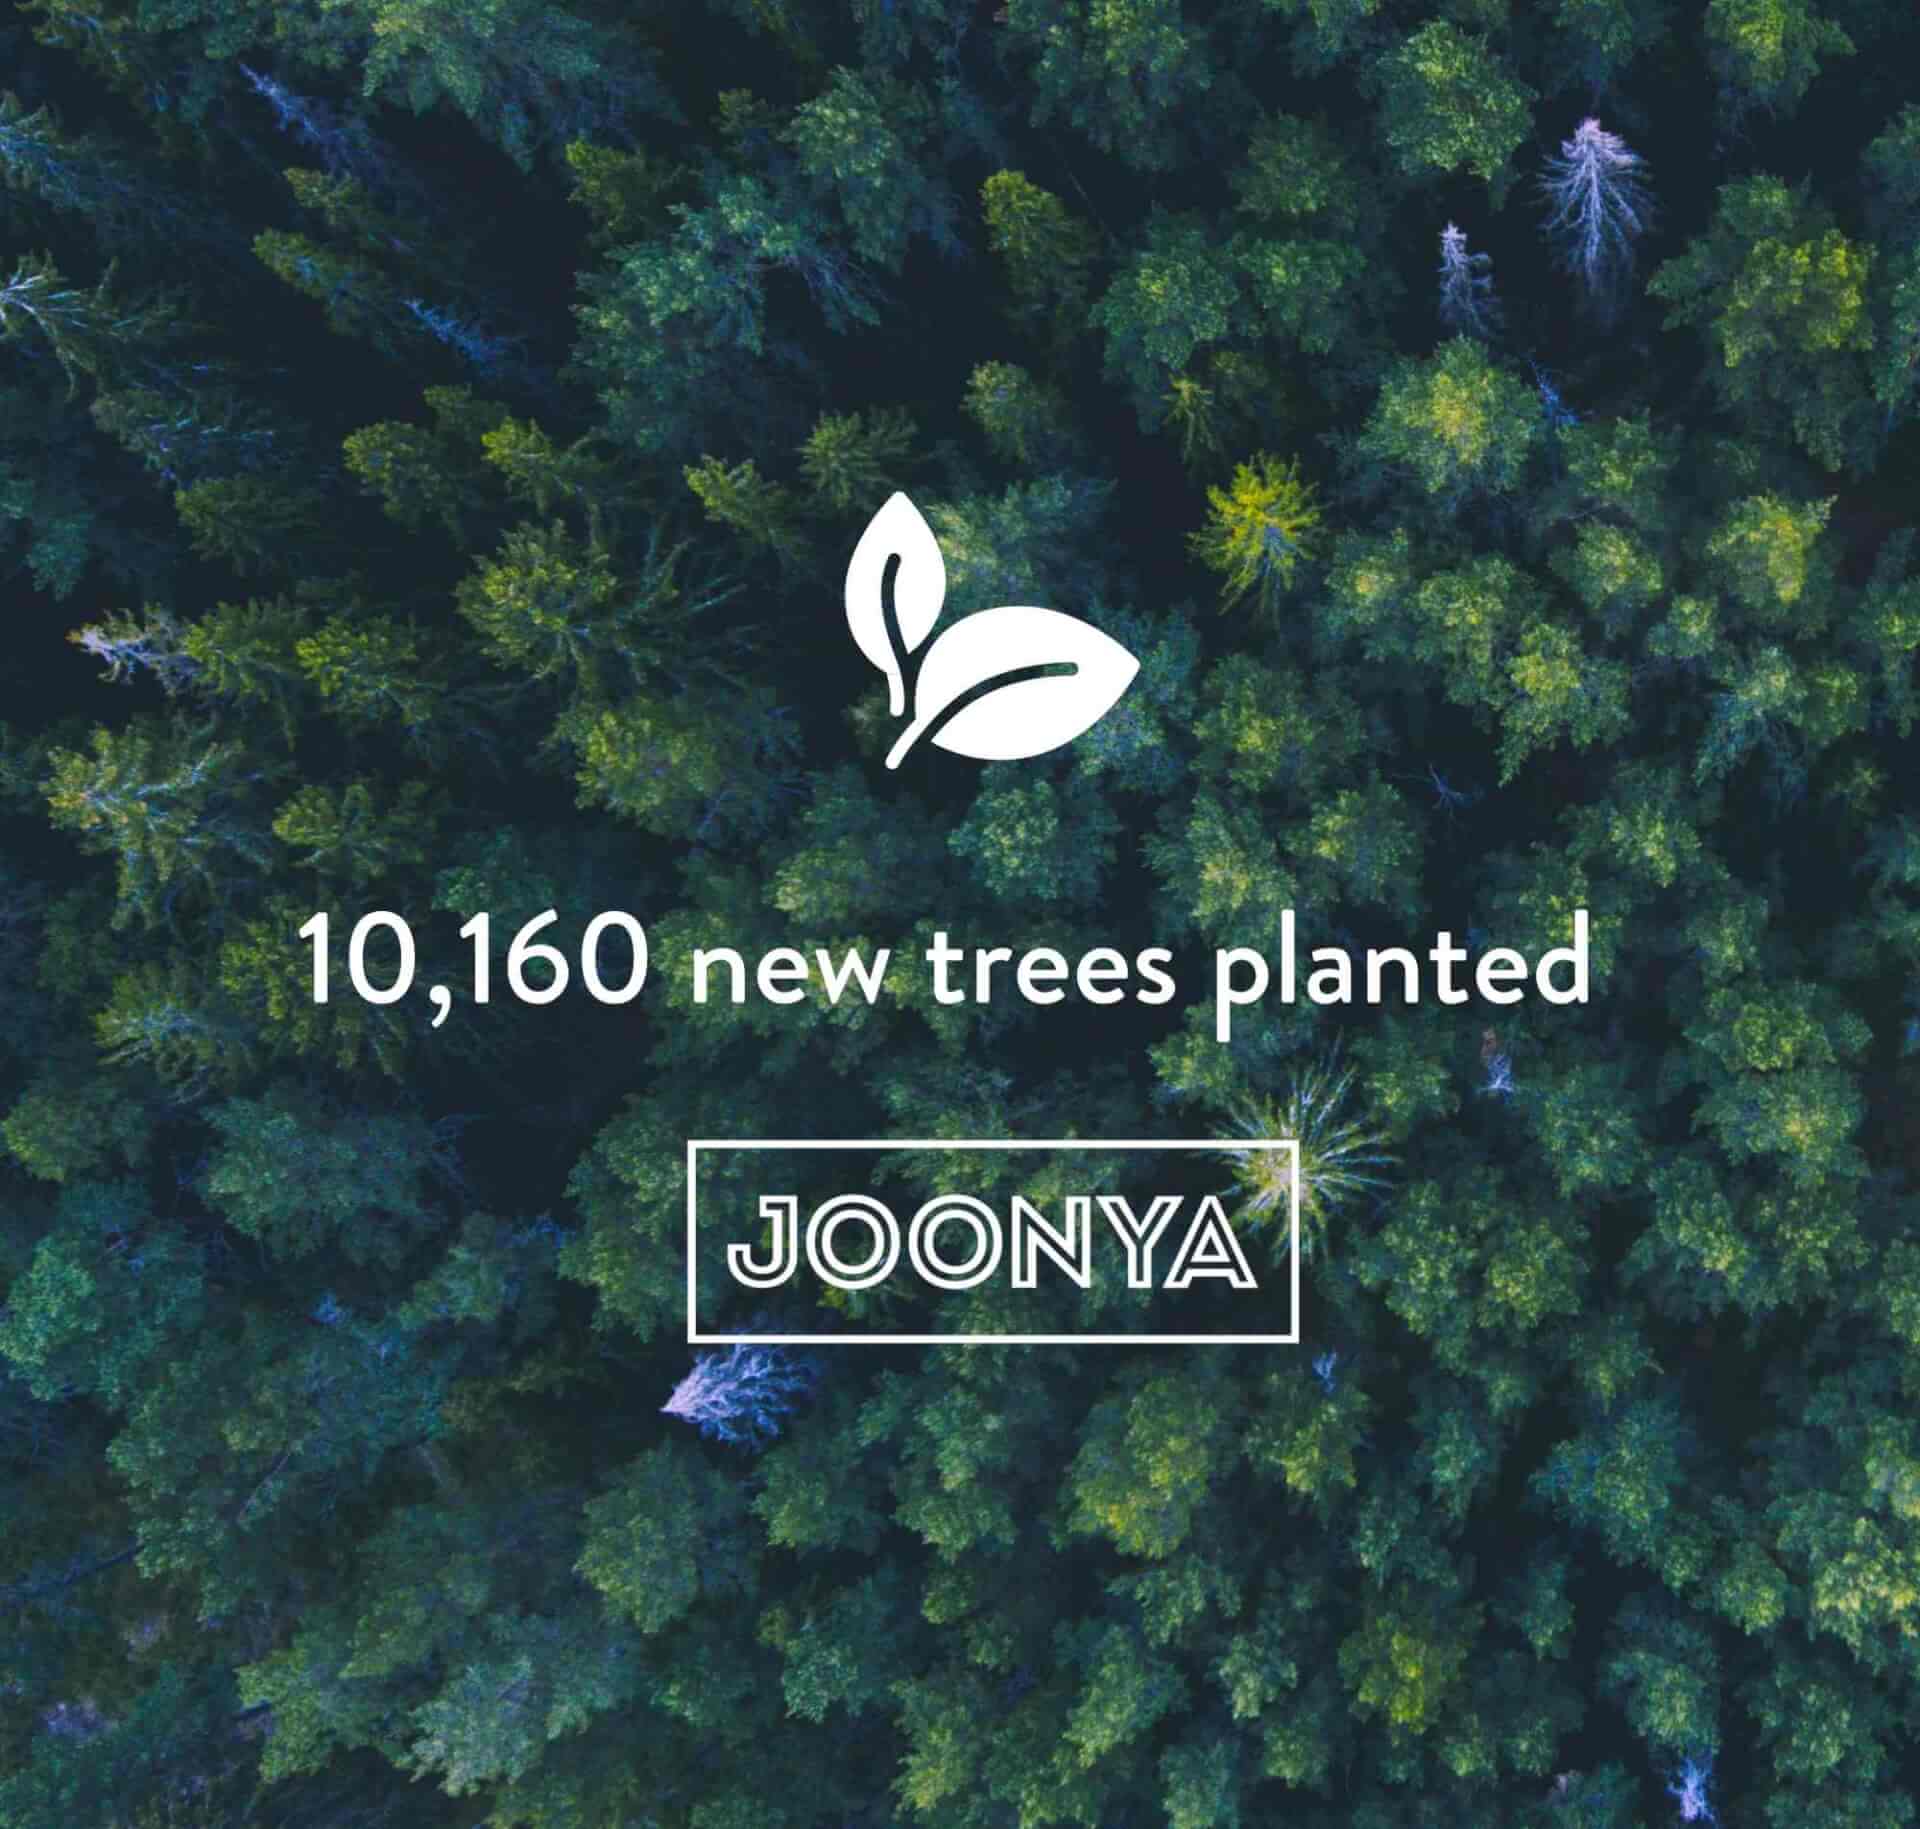 The Joonya forest is growing fast!